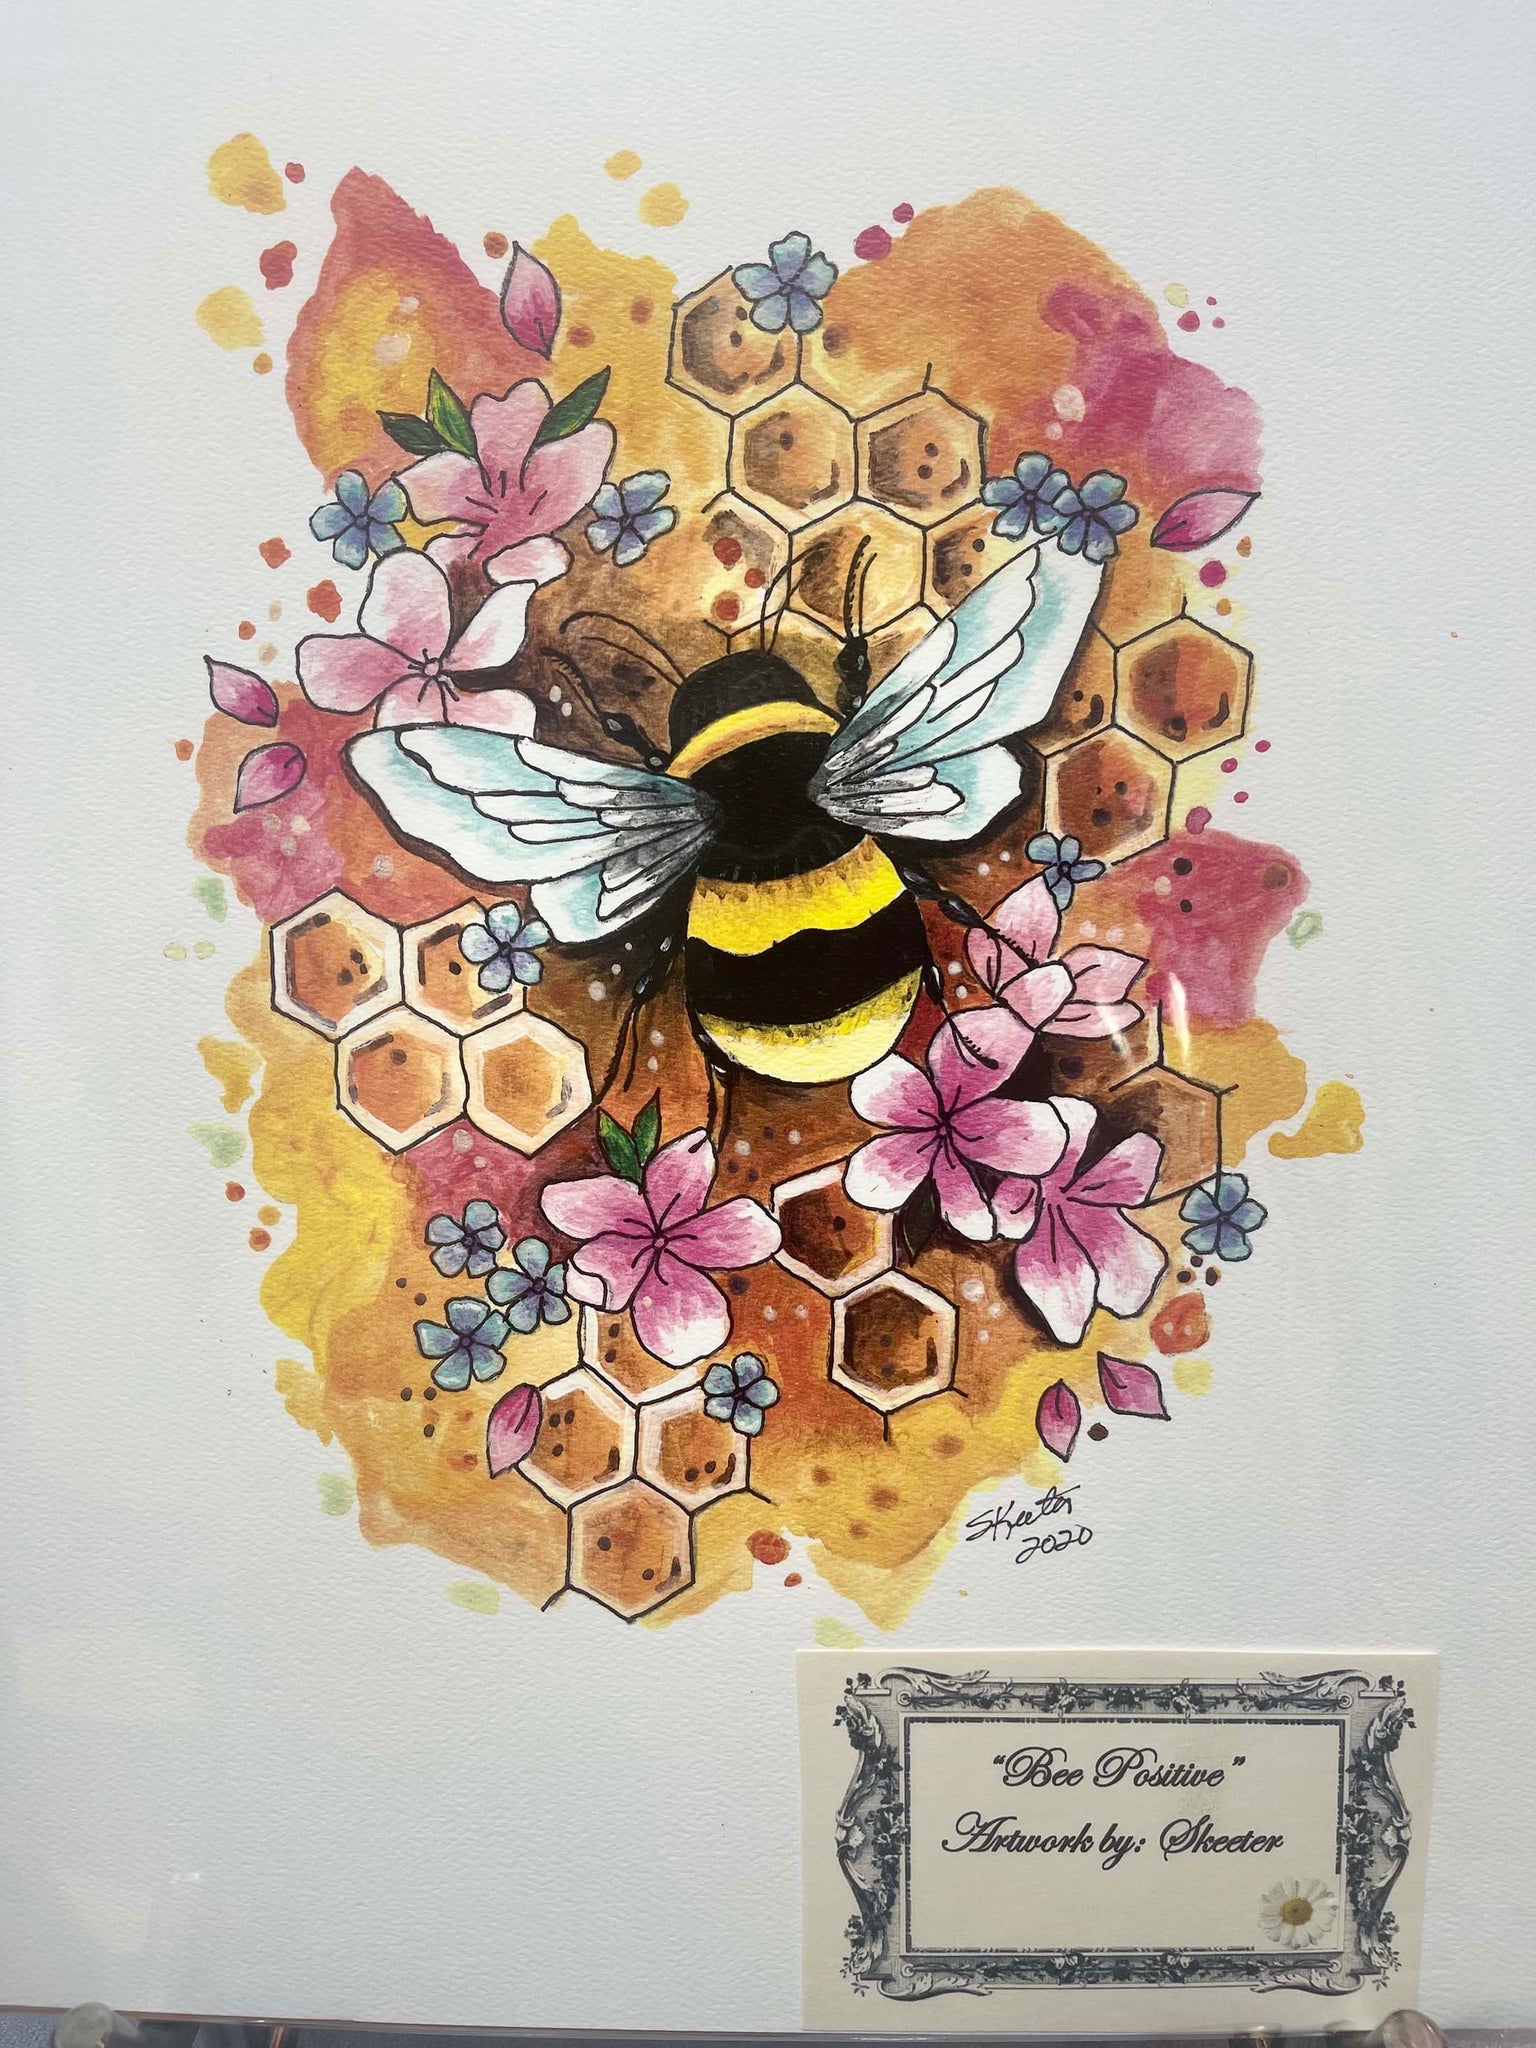 watercolor painting, bubblebee on honeycomb, flowers